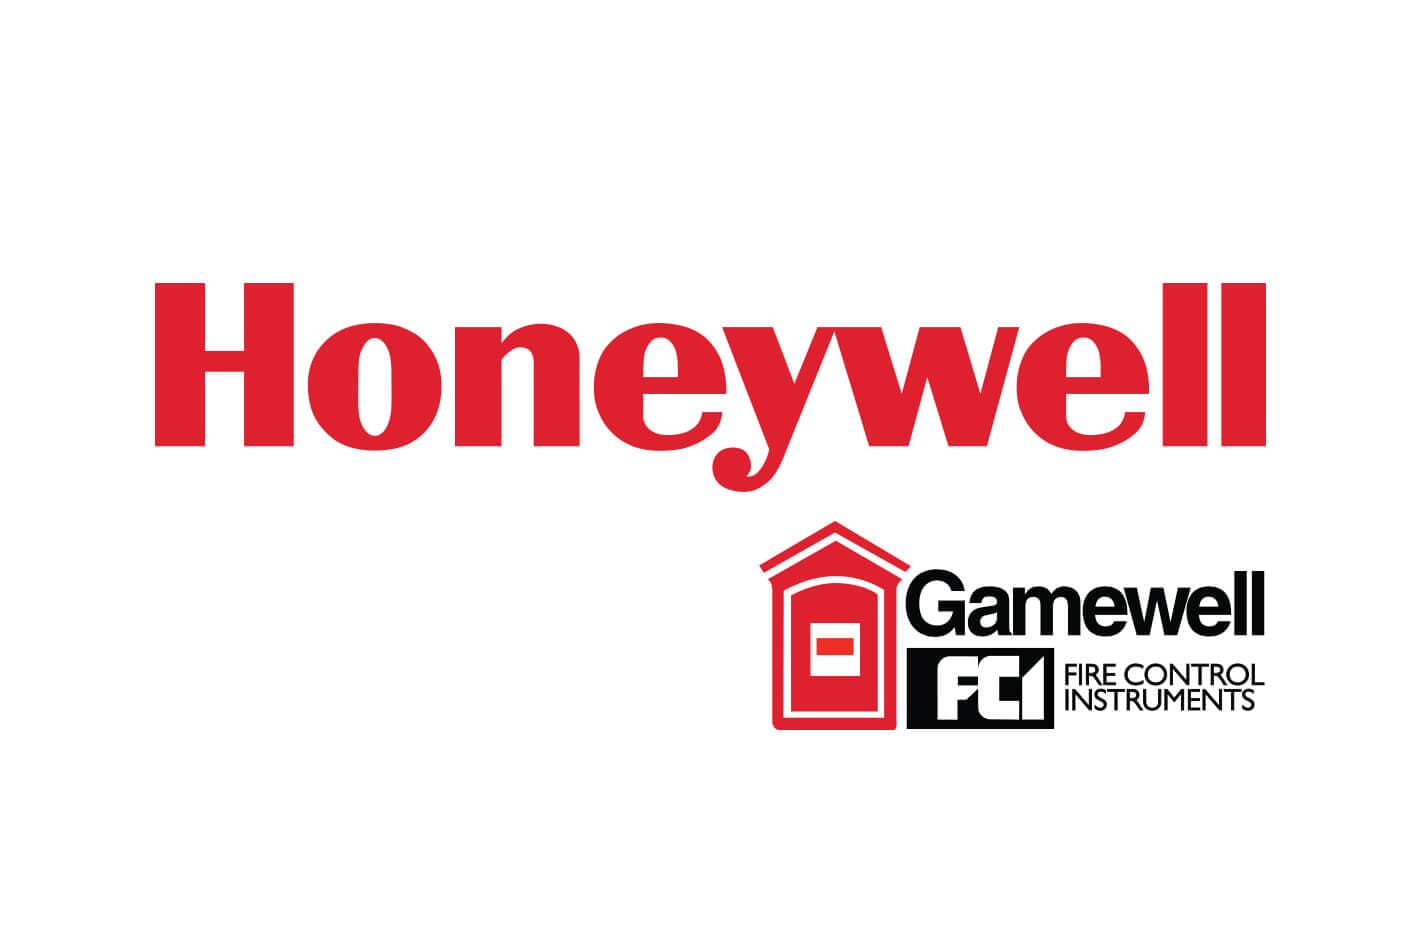 Gamewell-FCI by Honeywell